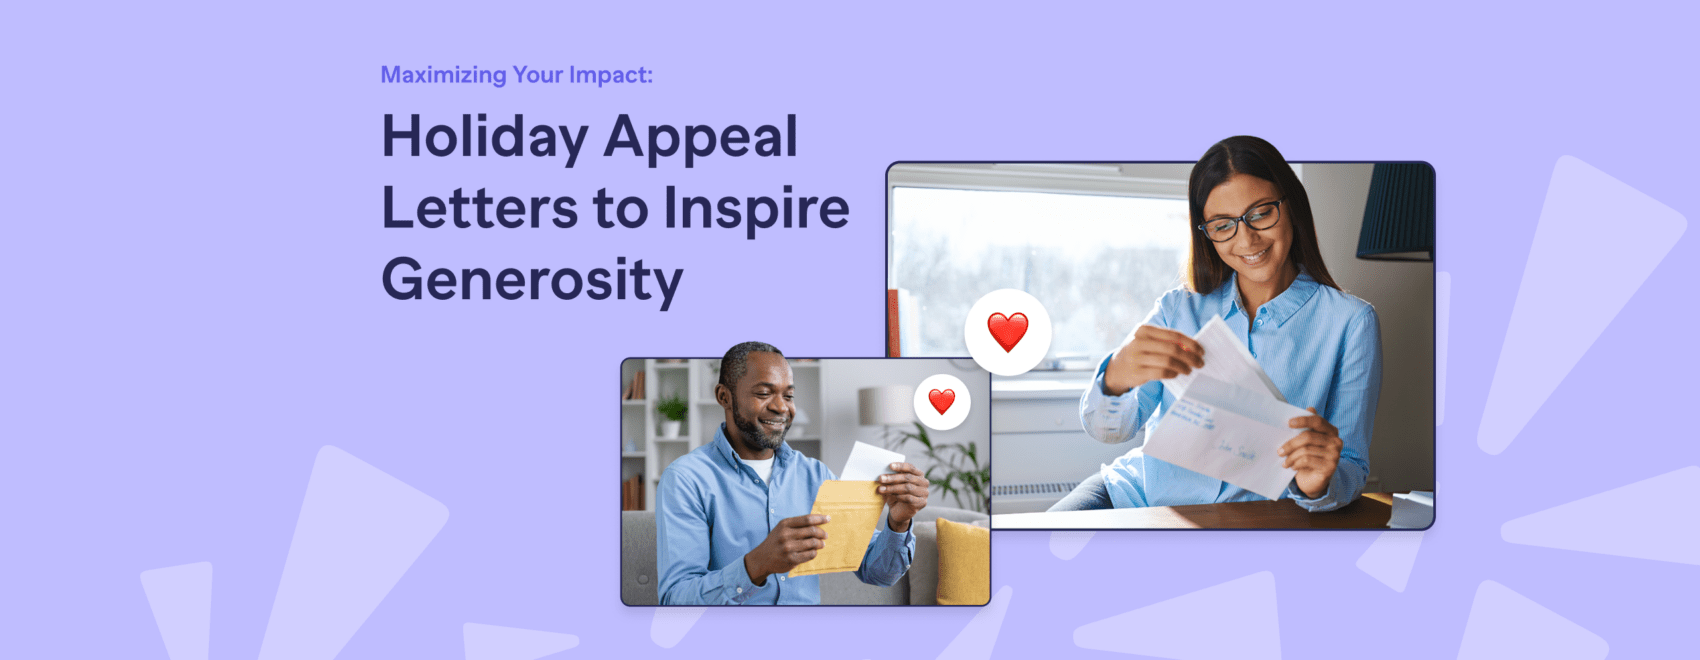 Maximizing Your Impact Holiday Appeal Letters to Inspire Generosity